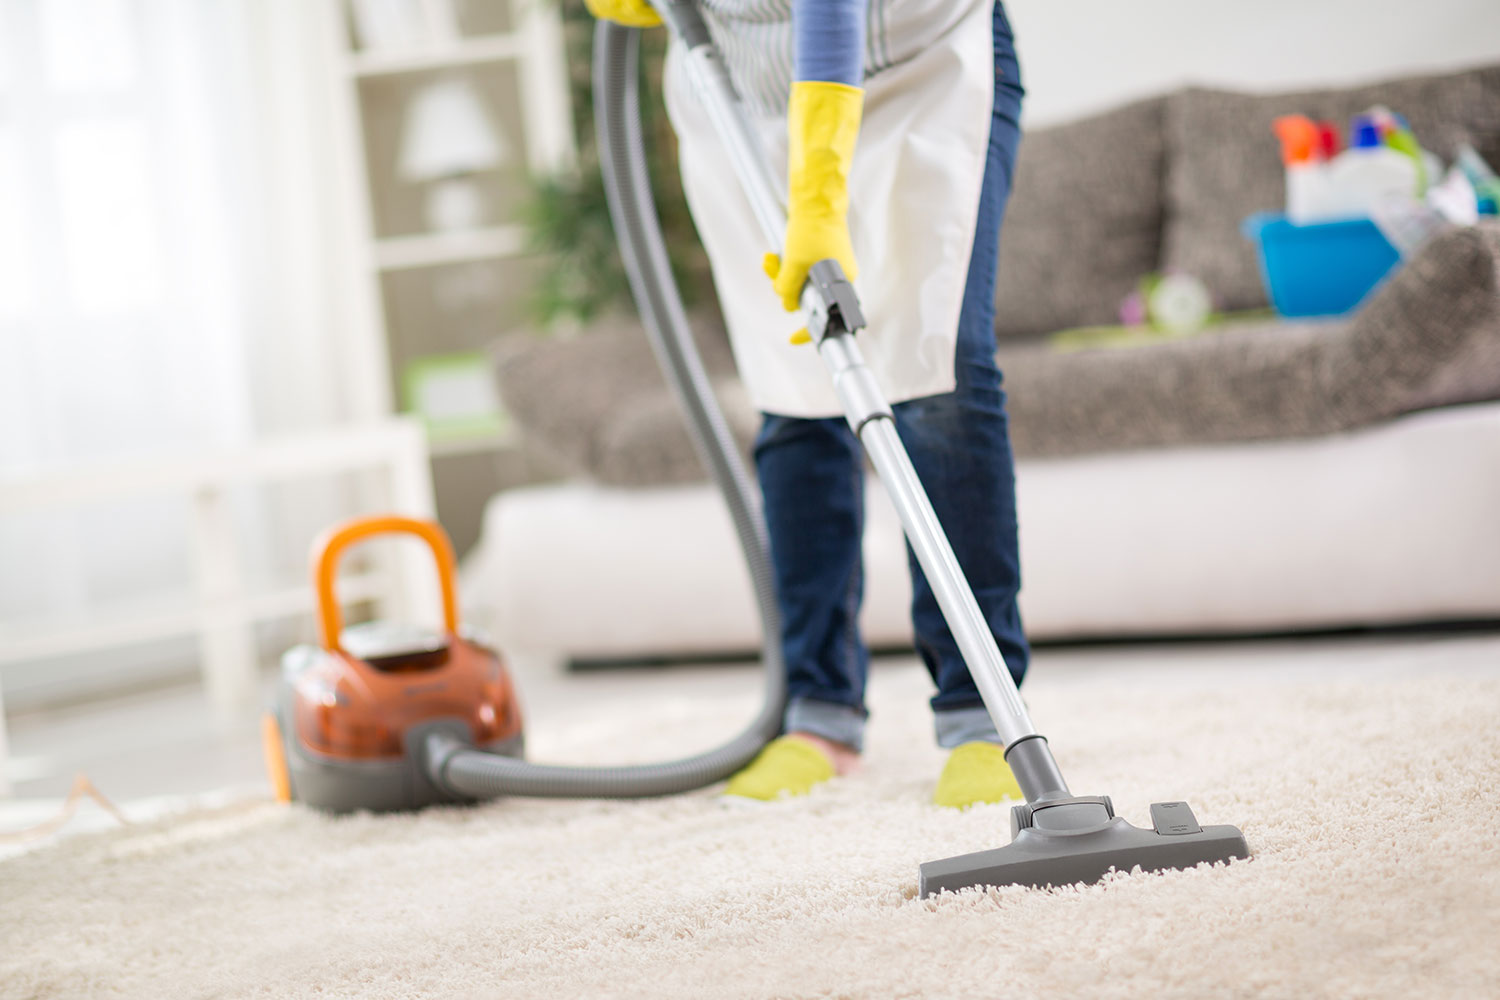 Carpet-Cleaning-3rd-Image